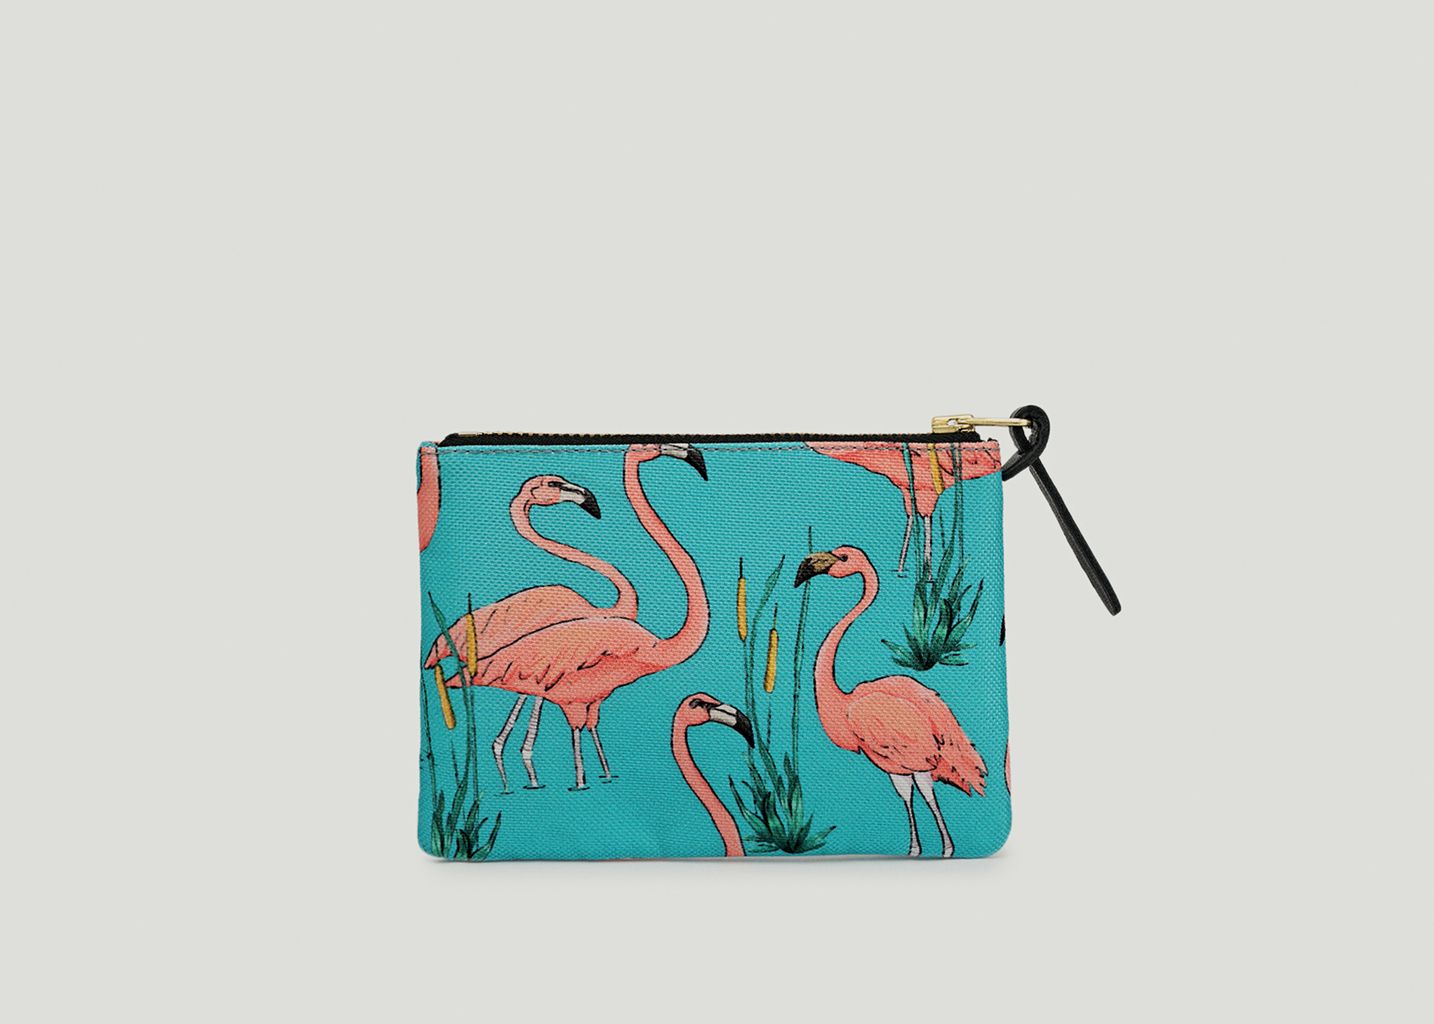 Small Flamingo Pouch - Wouf